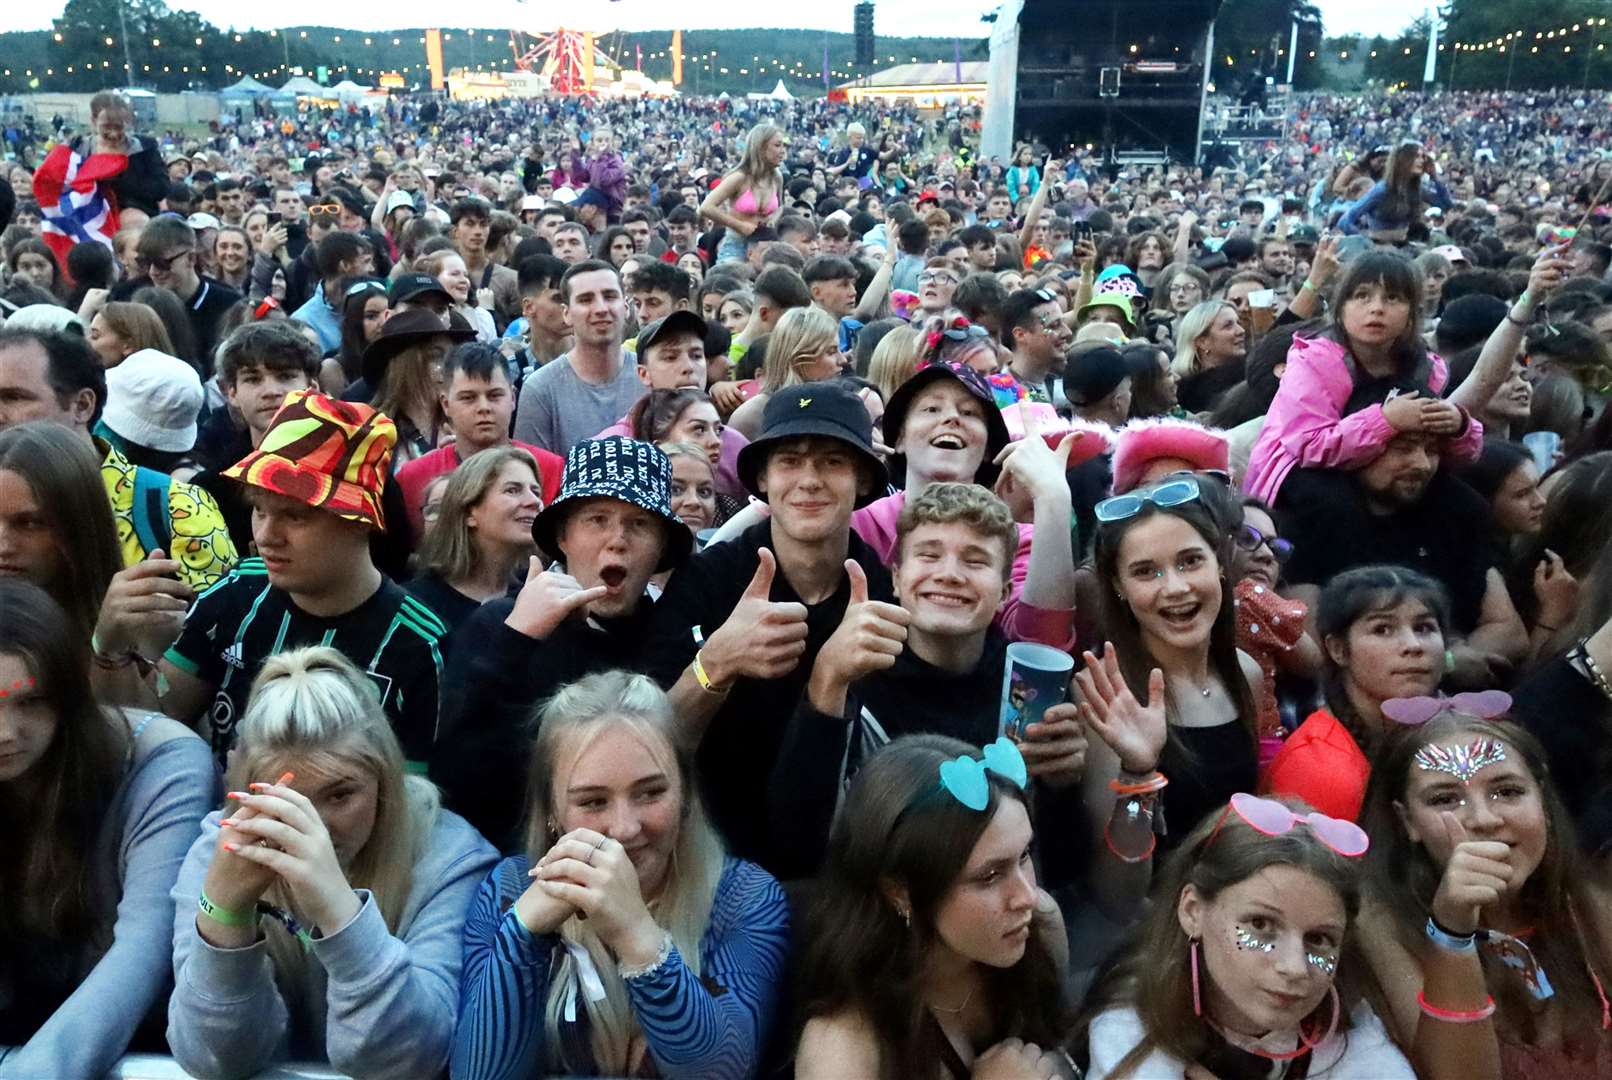 Crowds at the Hot House stage at Belladrum last month. Picture: James Mackenzie